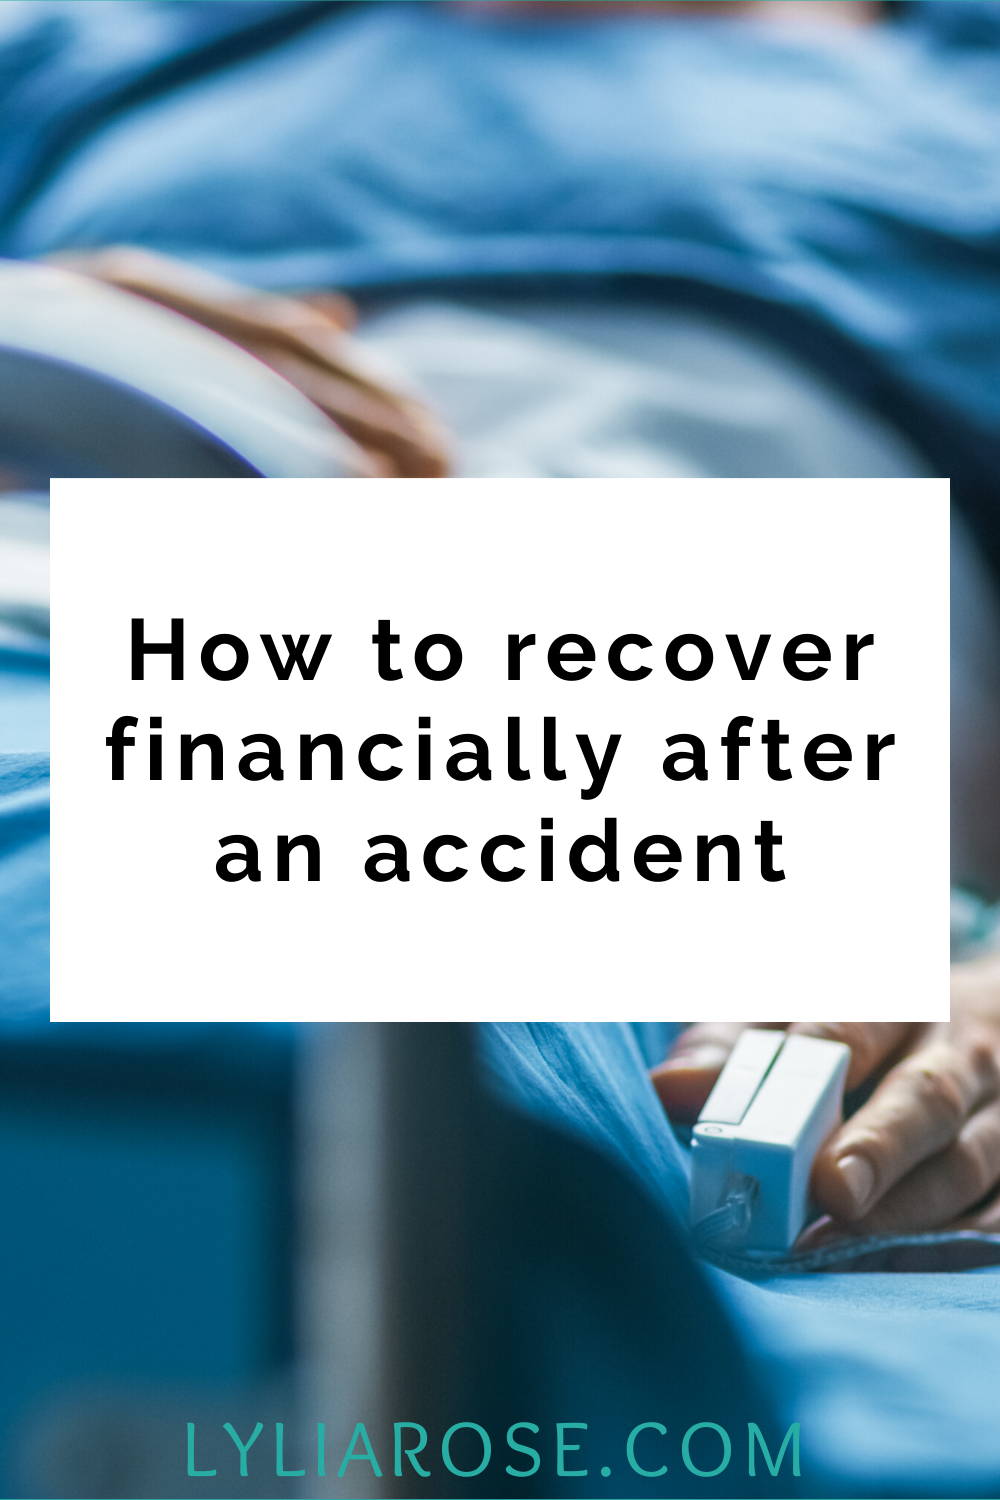 How to recover financially after an accident